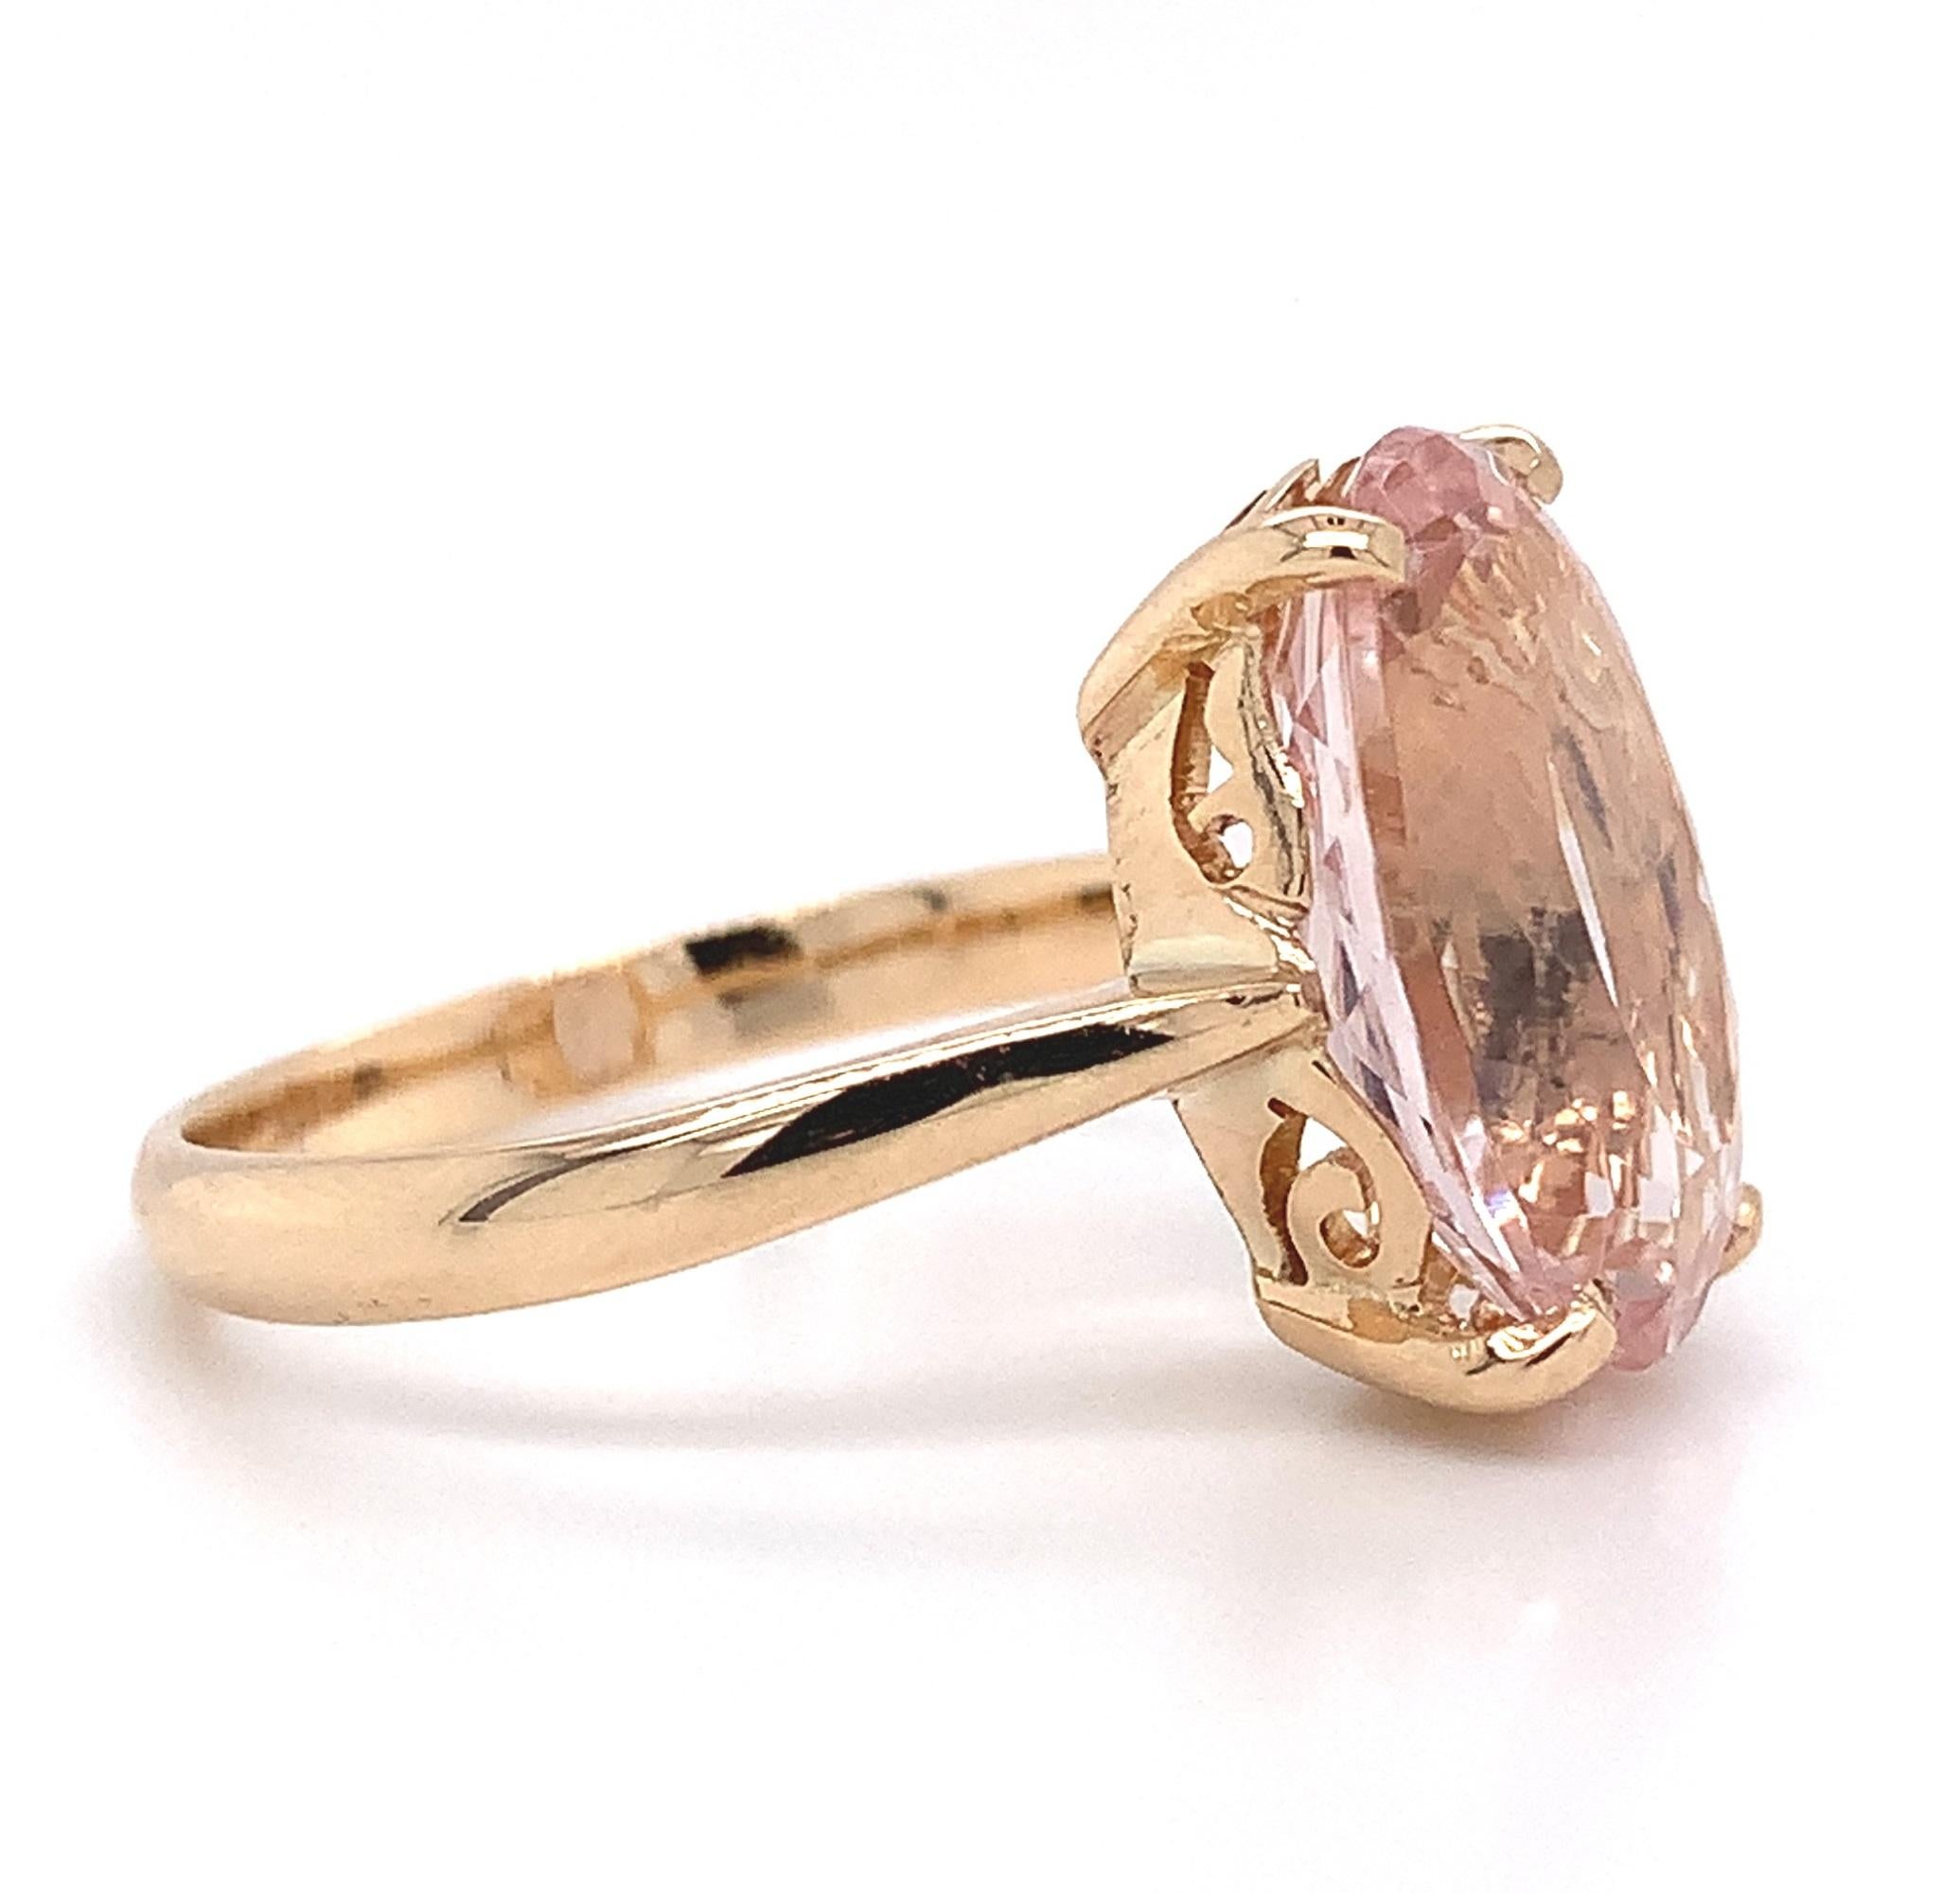 14K yellow gold vintage ring featuring an oval morganite weighing 5.21 carats. The morganite has light pink/peach color and measures about 14mm x 10mm. Morganite is the peach or pink variety of beryl (aquamarine). The mounting is hand pierced with